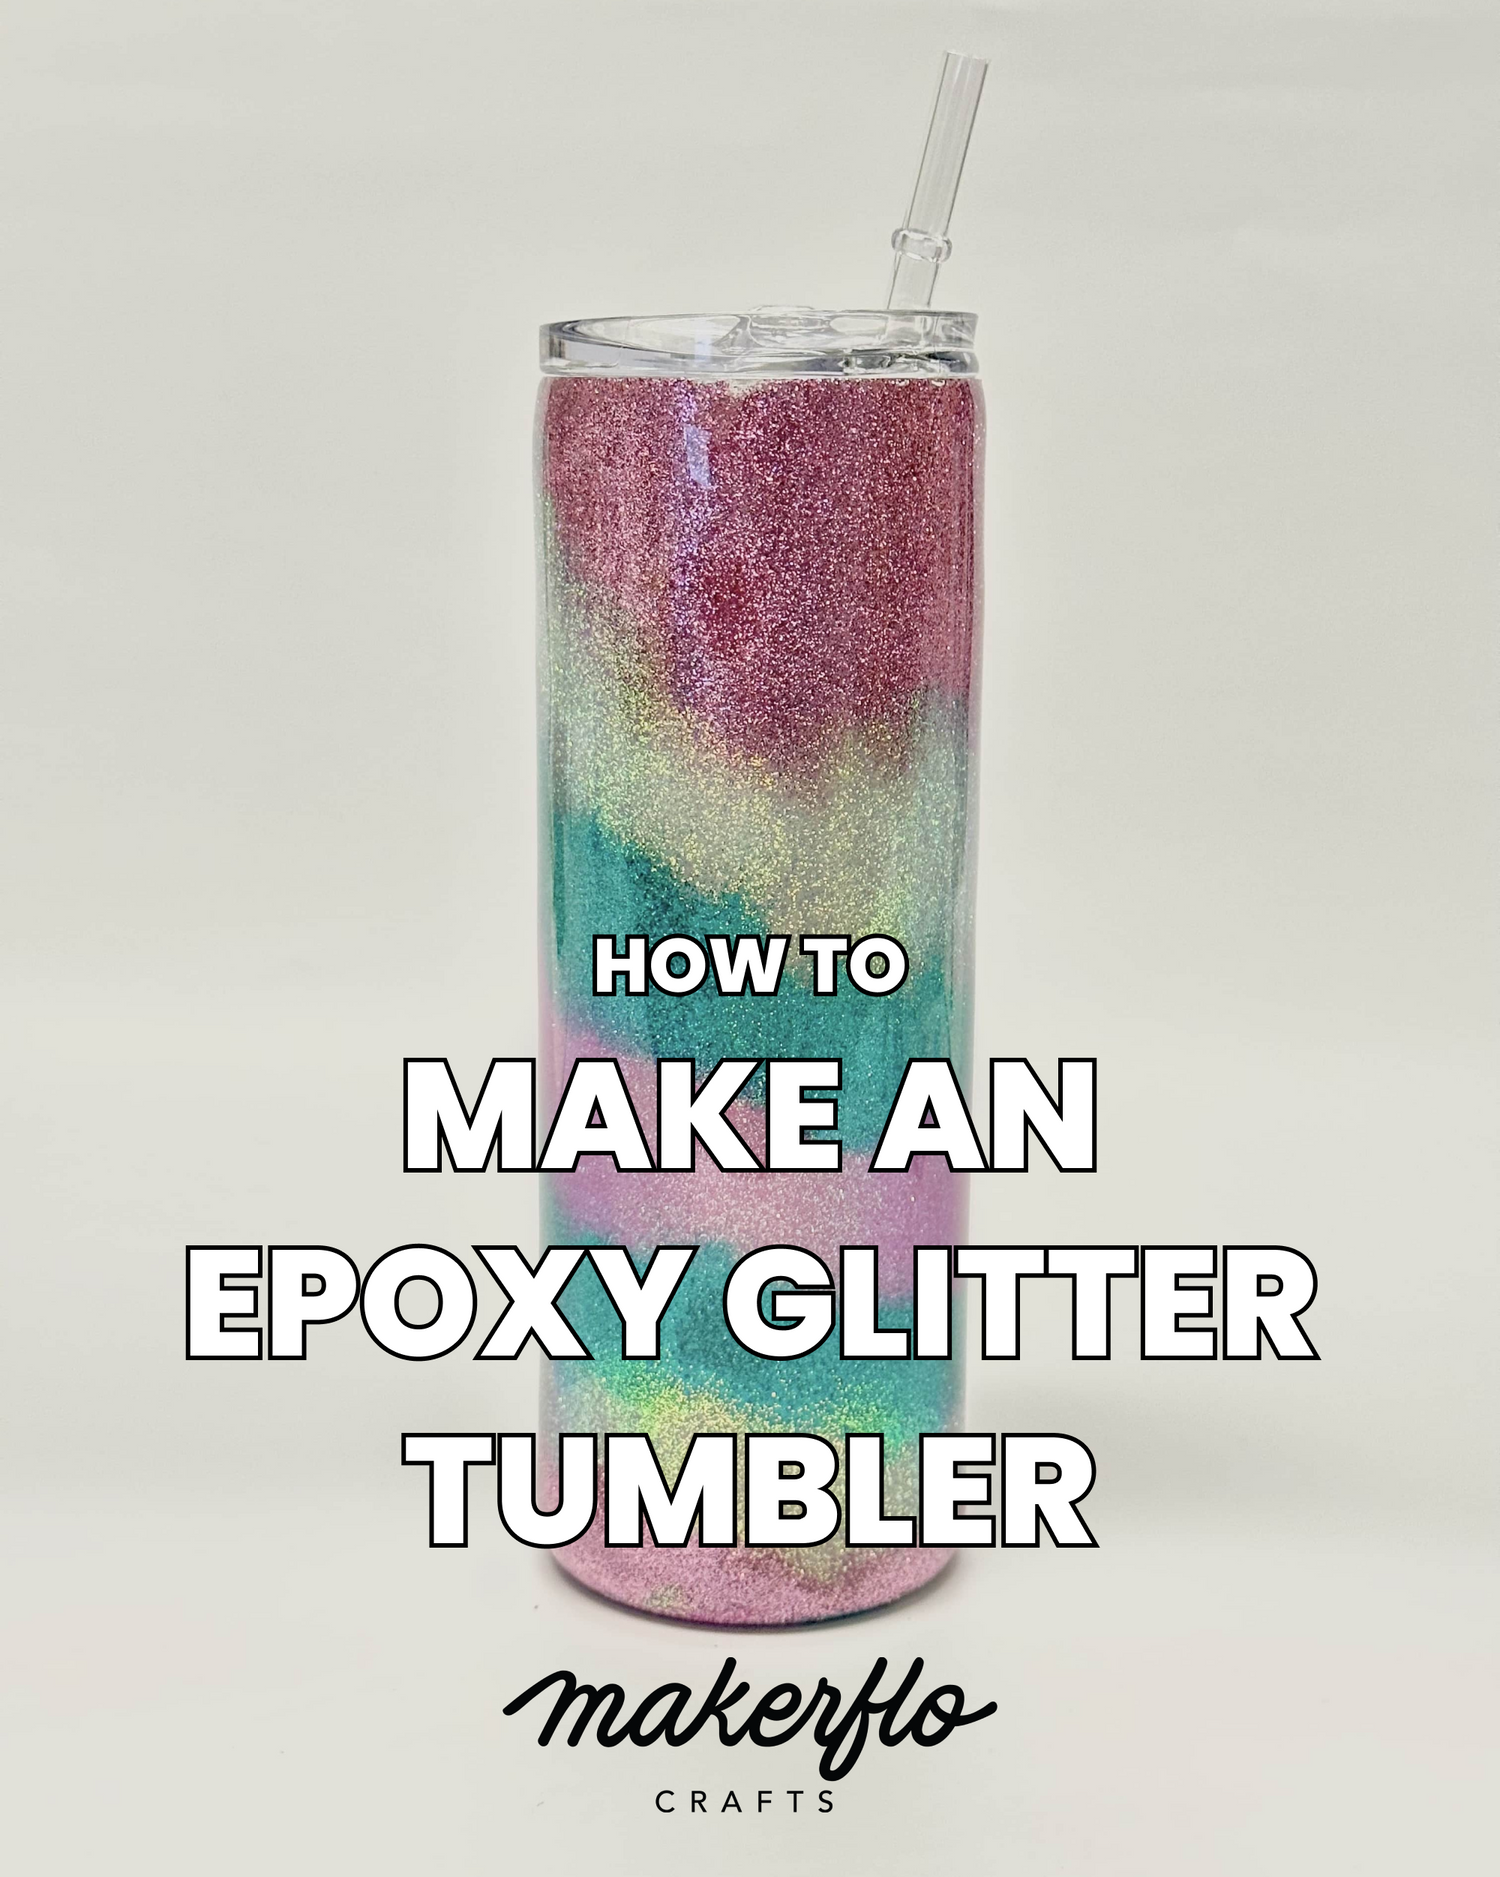 How To! Applying epoxy and glitter to tumblers with handles using